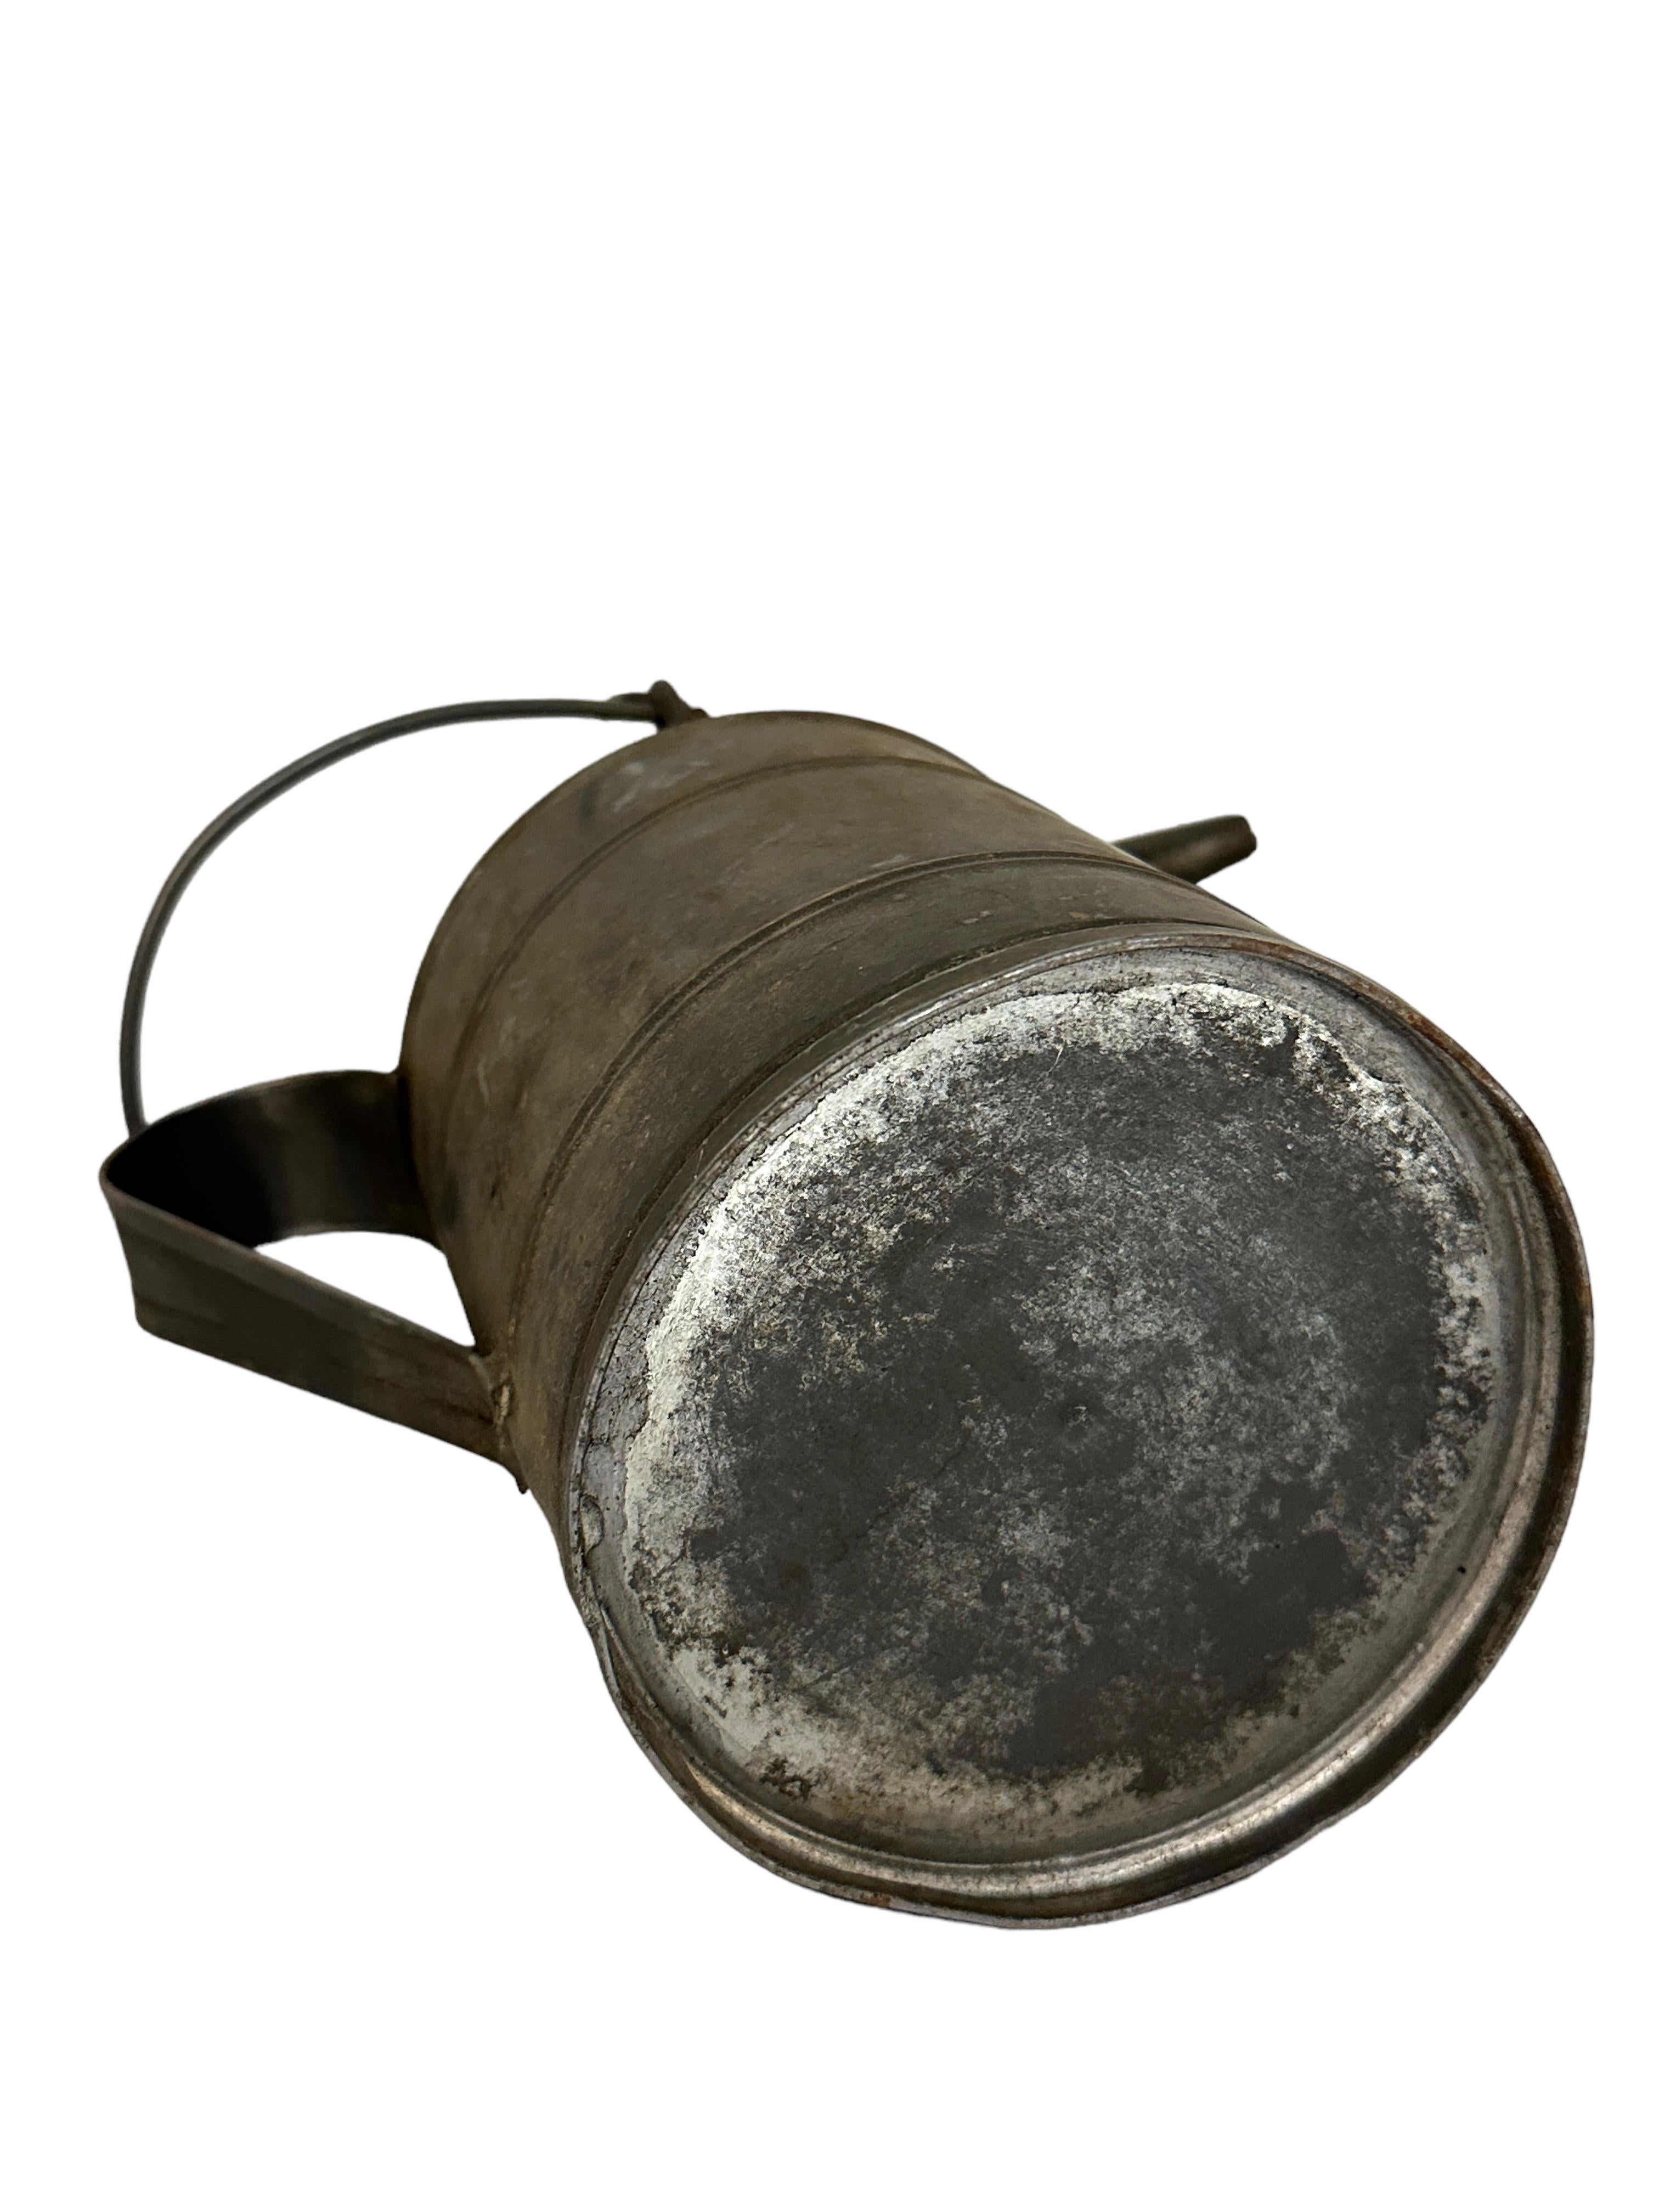 European Railways Oil Can, Vintage Oil Can, Industrial Style 1920s For Sale 7